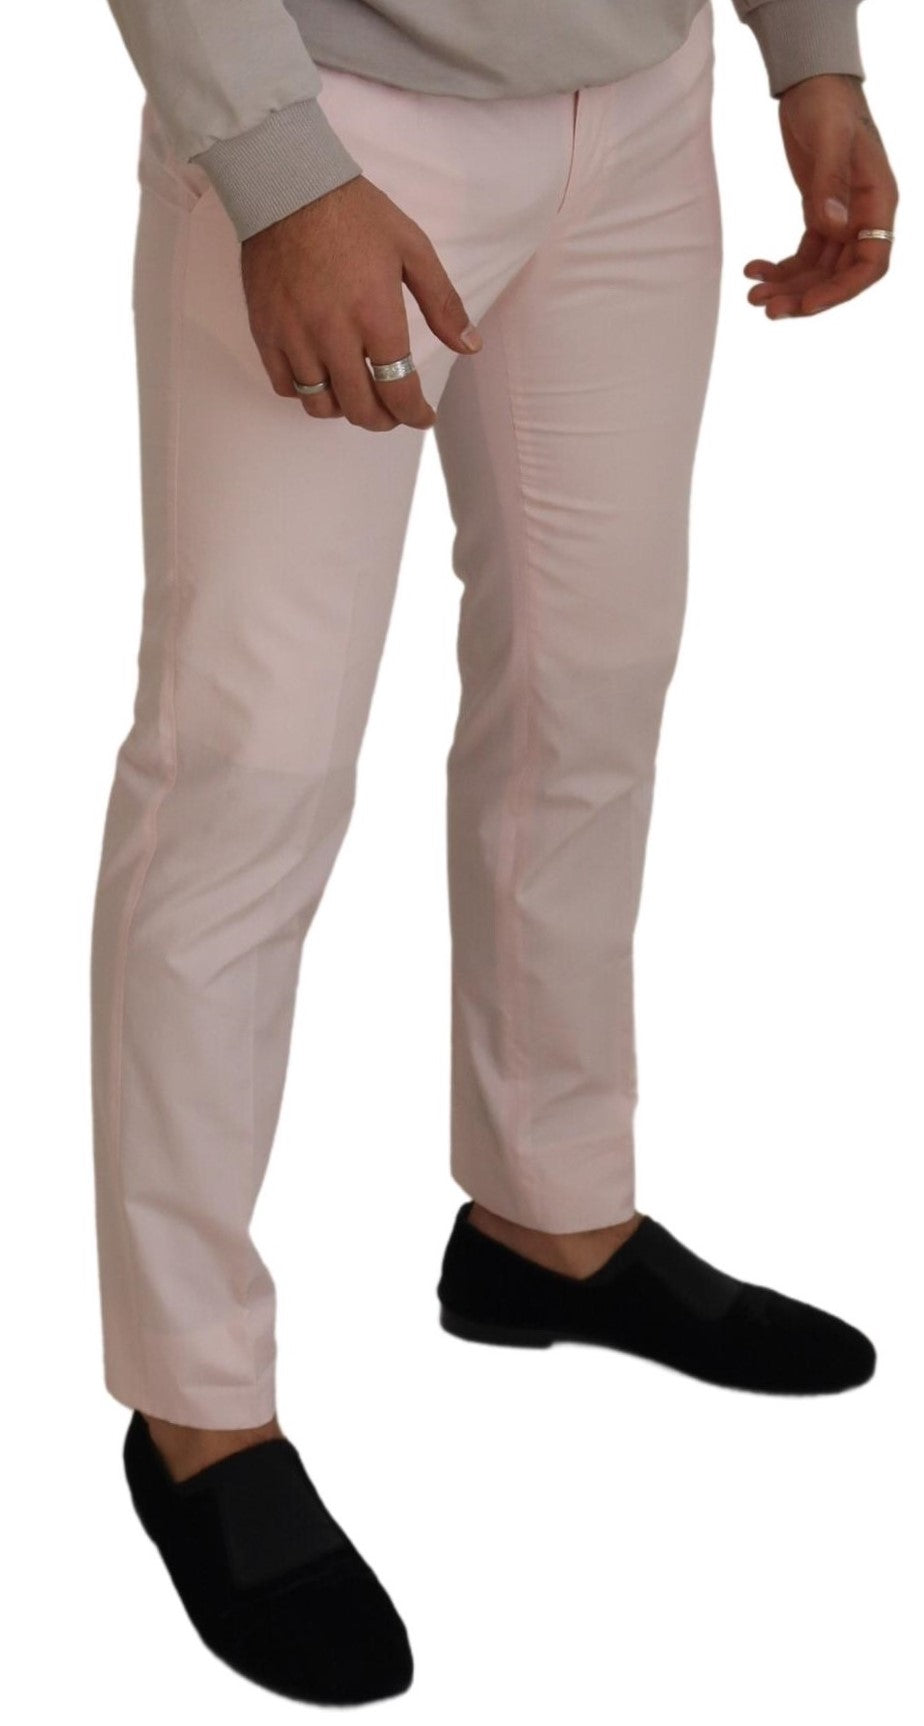 Elegant Pink Chino Pants - Perfect Stretch Fit